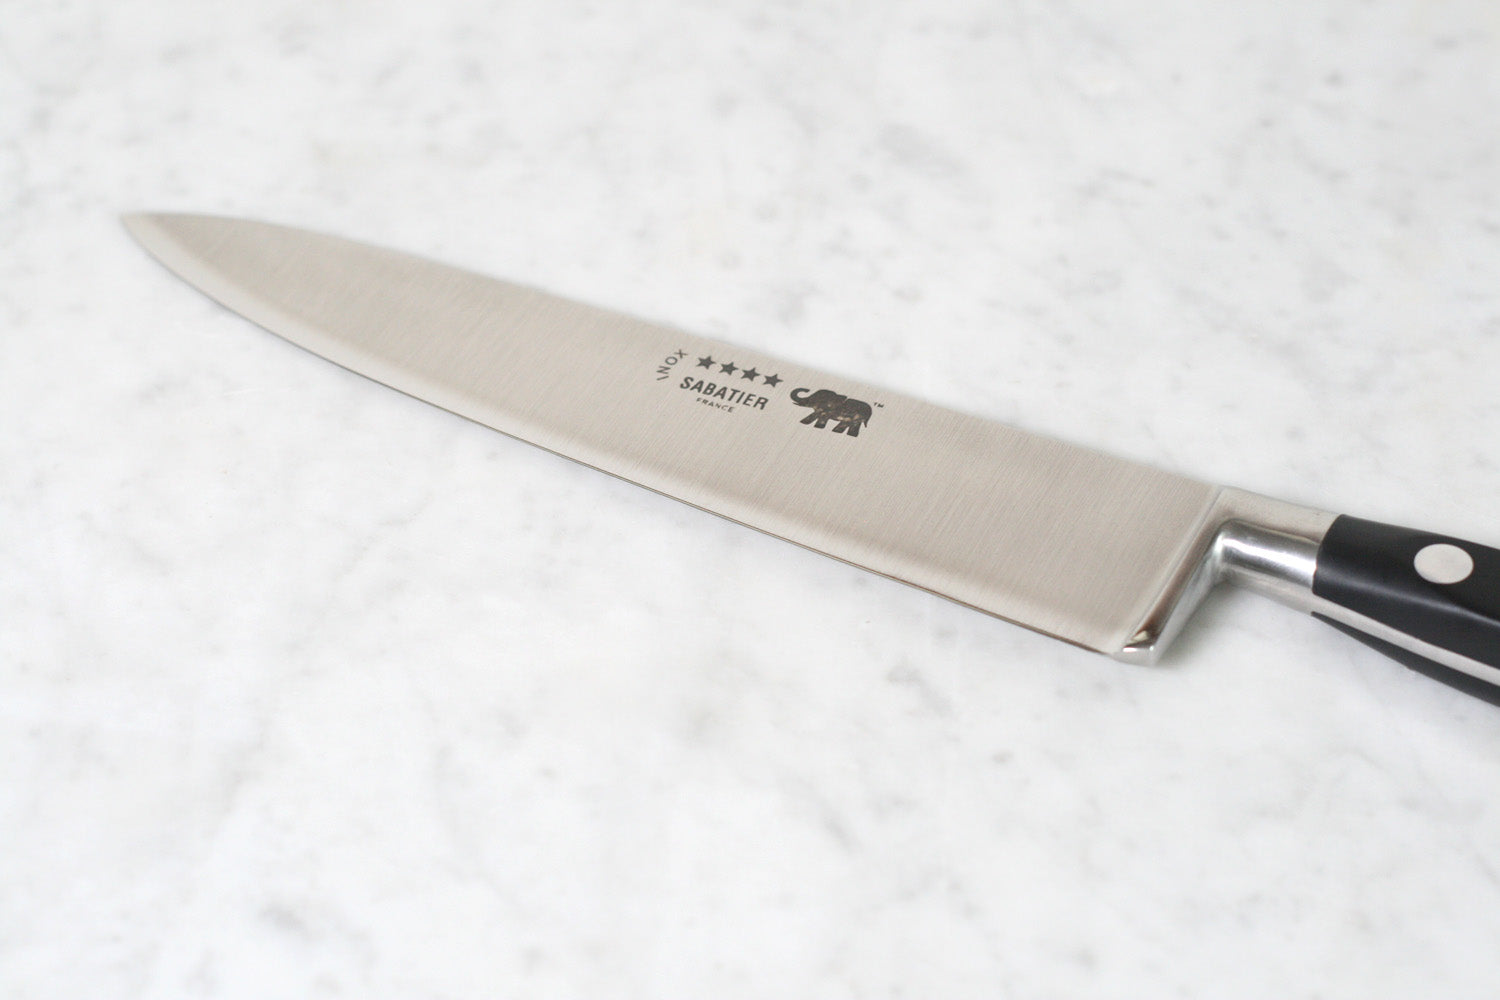 Sabatier 8" Chef's Knife Stainless Steel